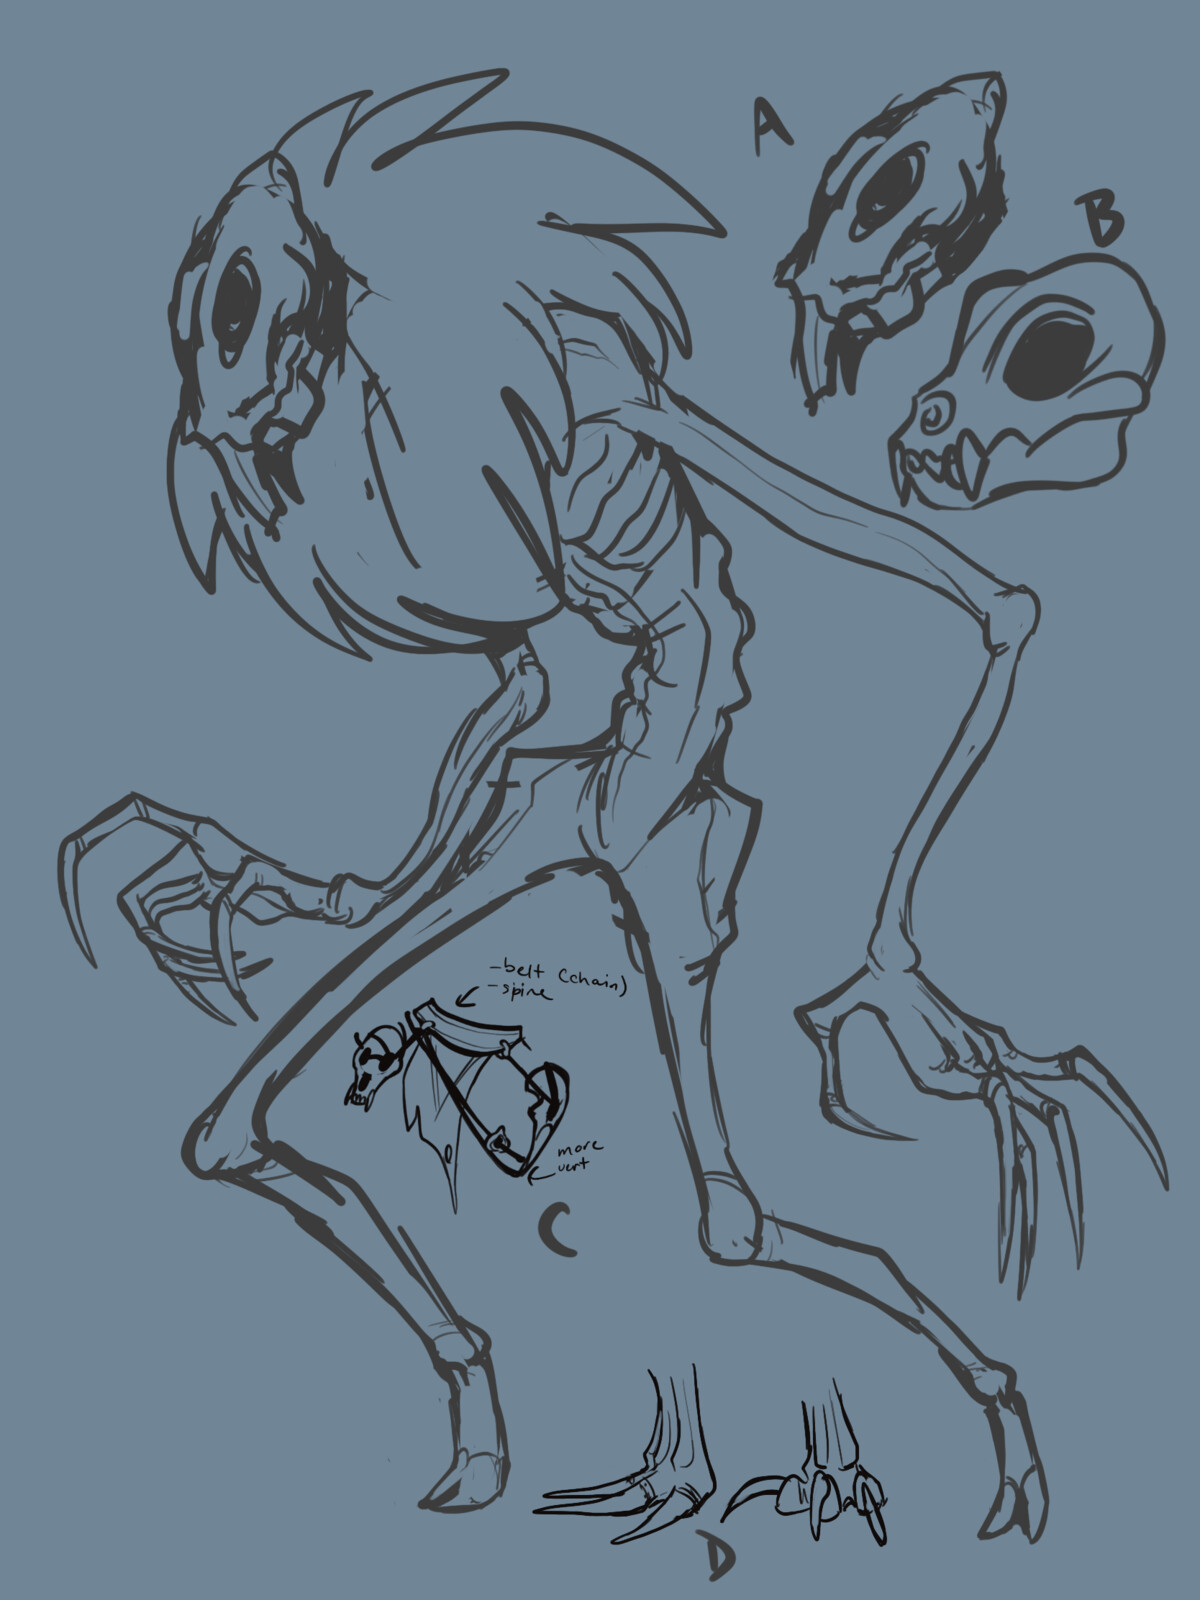 Client wanted:
A) A squirrel skull
B) OR a cat skull
C) Clothing consisting of a loincloth, other animal skulls, and a row of vertebrae as the belt.
D) Three different considerations for feet design including insect-like hooves, long claws, or paws.